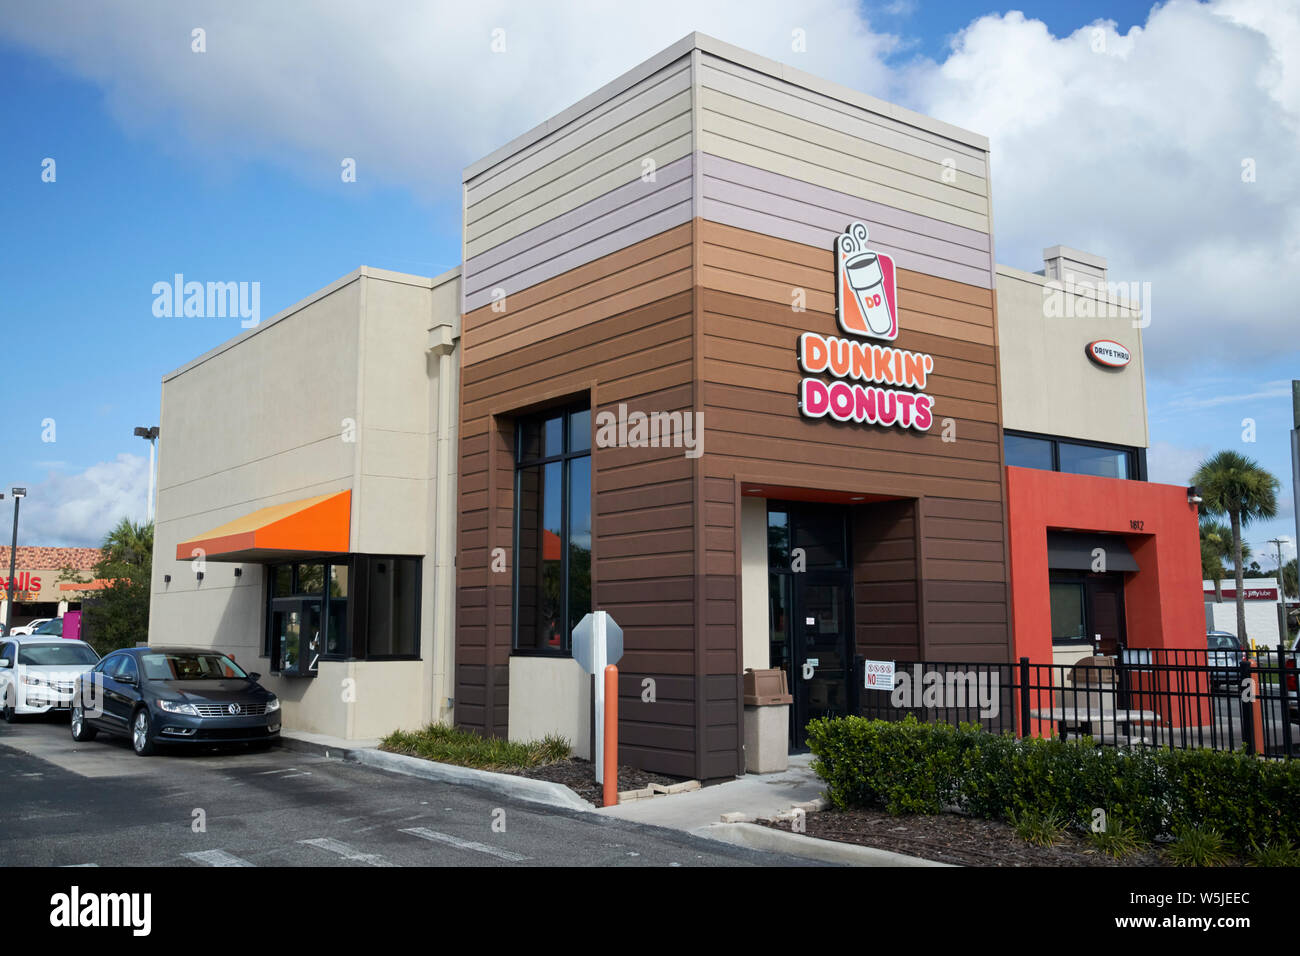 dunkin donuts restaurant franchise with drive thru florida usa united states of america Stock Photo